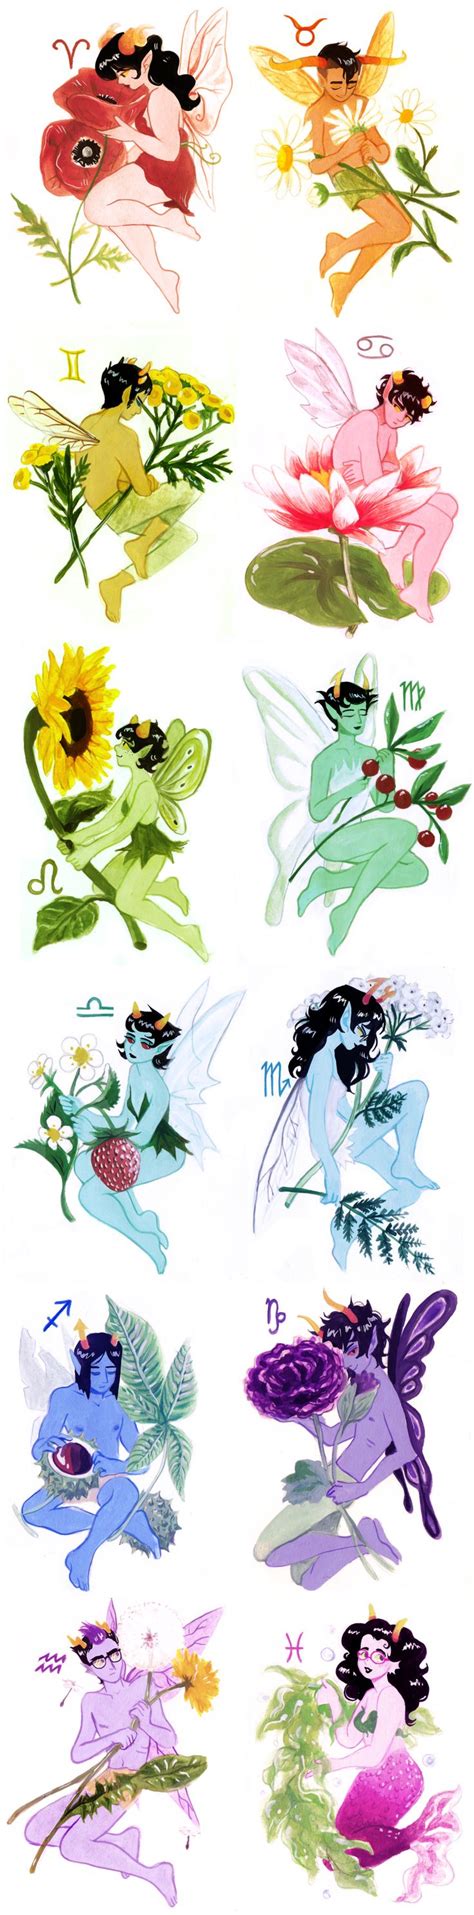 An Image Of Different Colored Flowers On A White Background